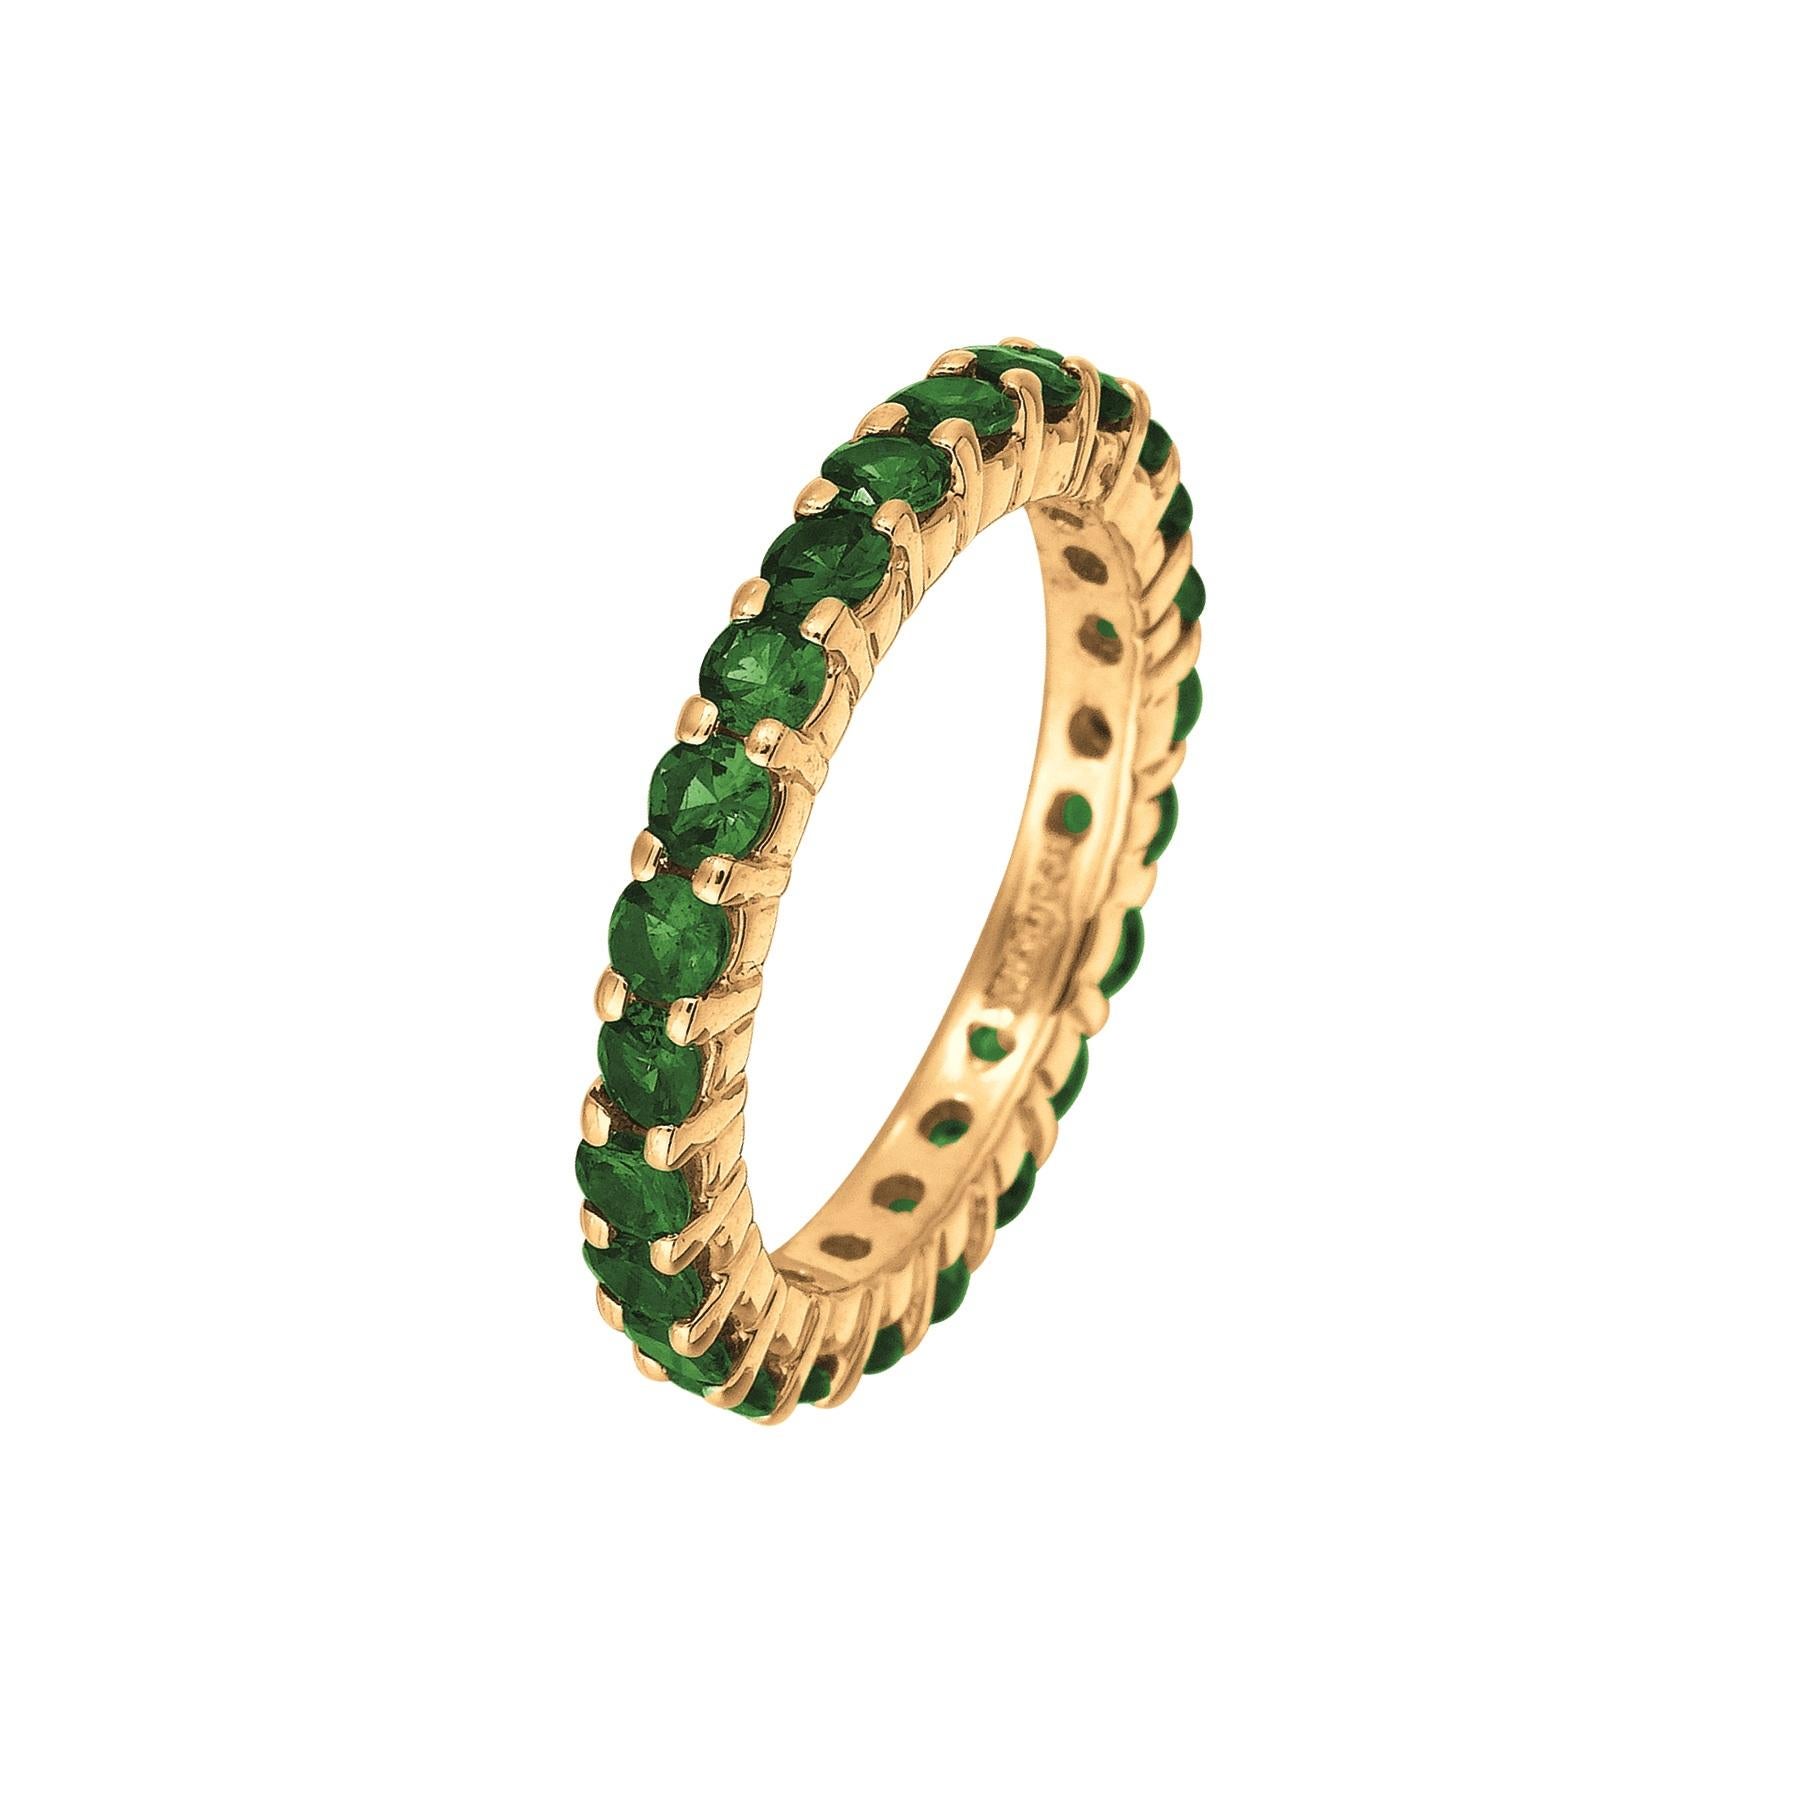 2.80 Ct Round Cut Tsavorite Eternity Ring Band 14K Yellow Gold

100% Natural Tsavorite
2.80CT
Green
SI
14K Yellow Gold Prong set style 3.30 grams
2.5 mm in width
Size 7
23 stones

MM40YST

ALL OUR ITEMS ARE AVAILABLE TO BE ORDERED IN 14K WHITE, ROSE